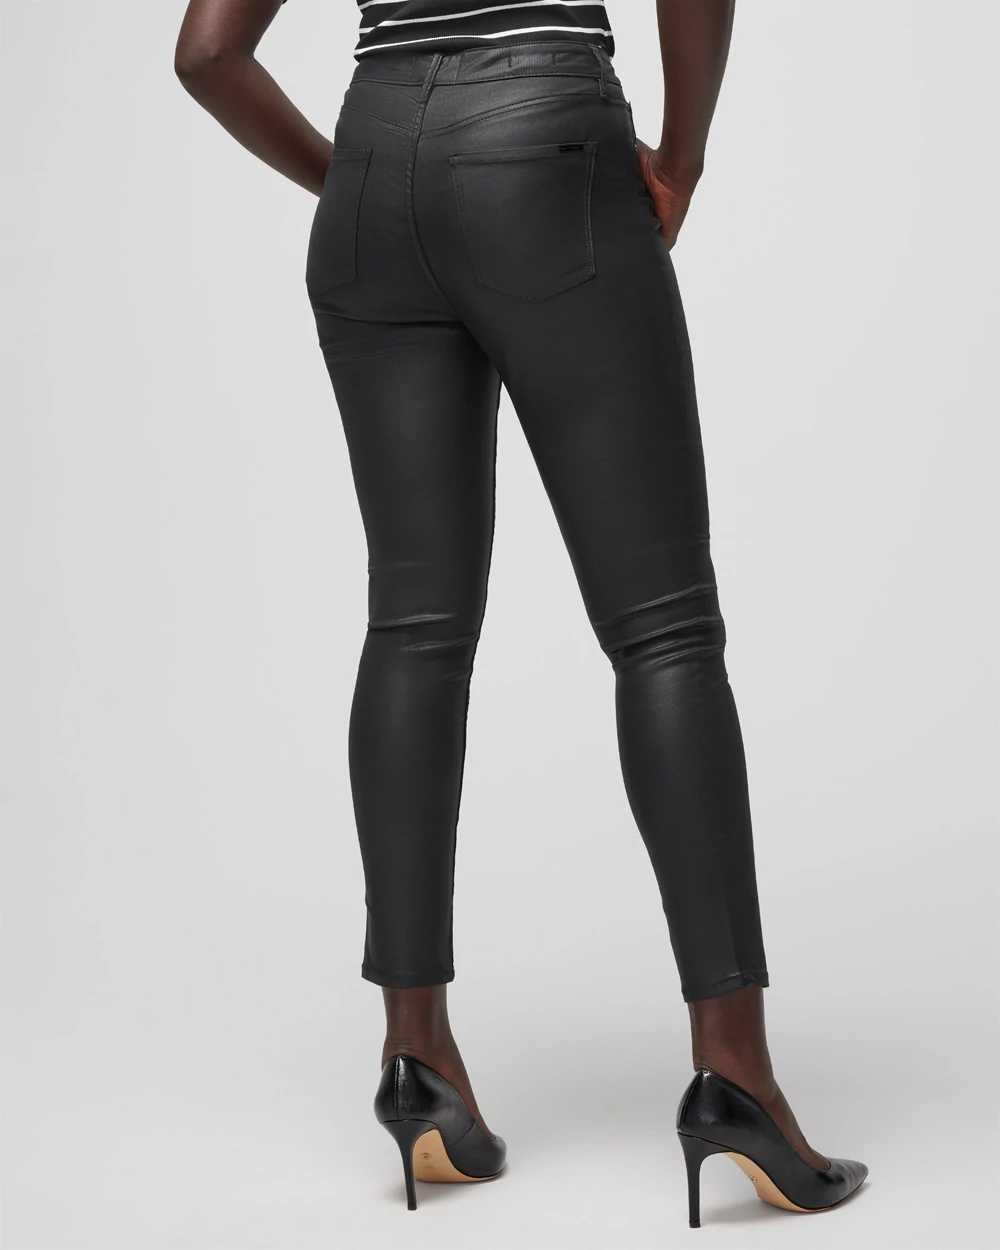 Curvy High-Rise Coated Skinny Jeans click to view larger image.